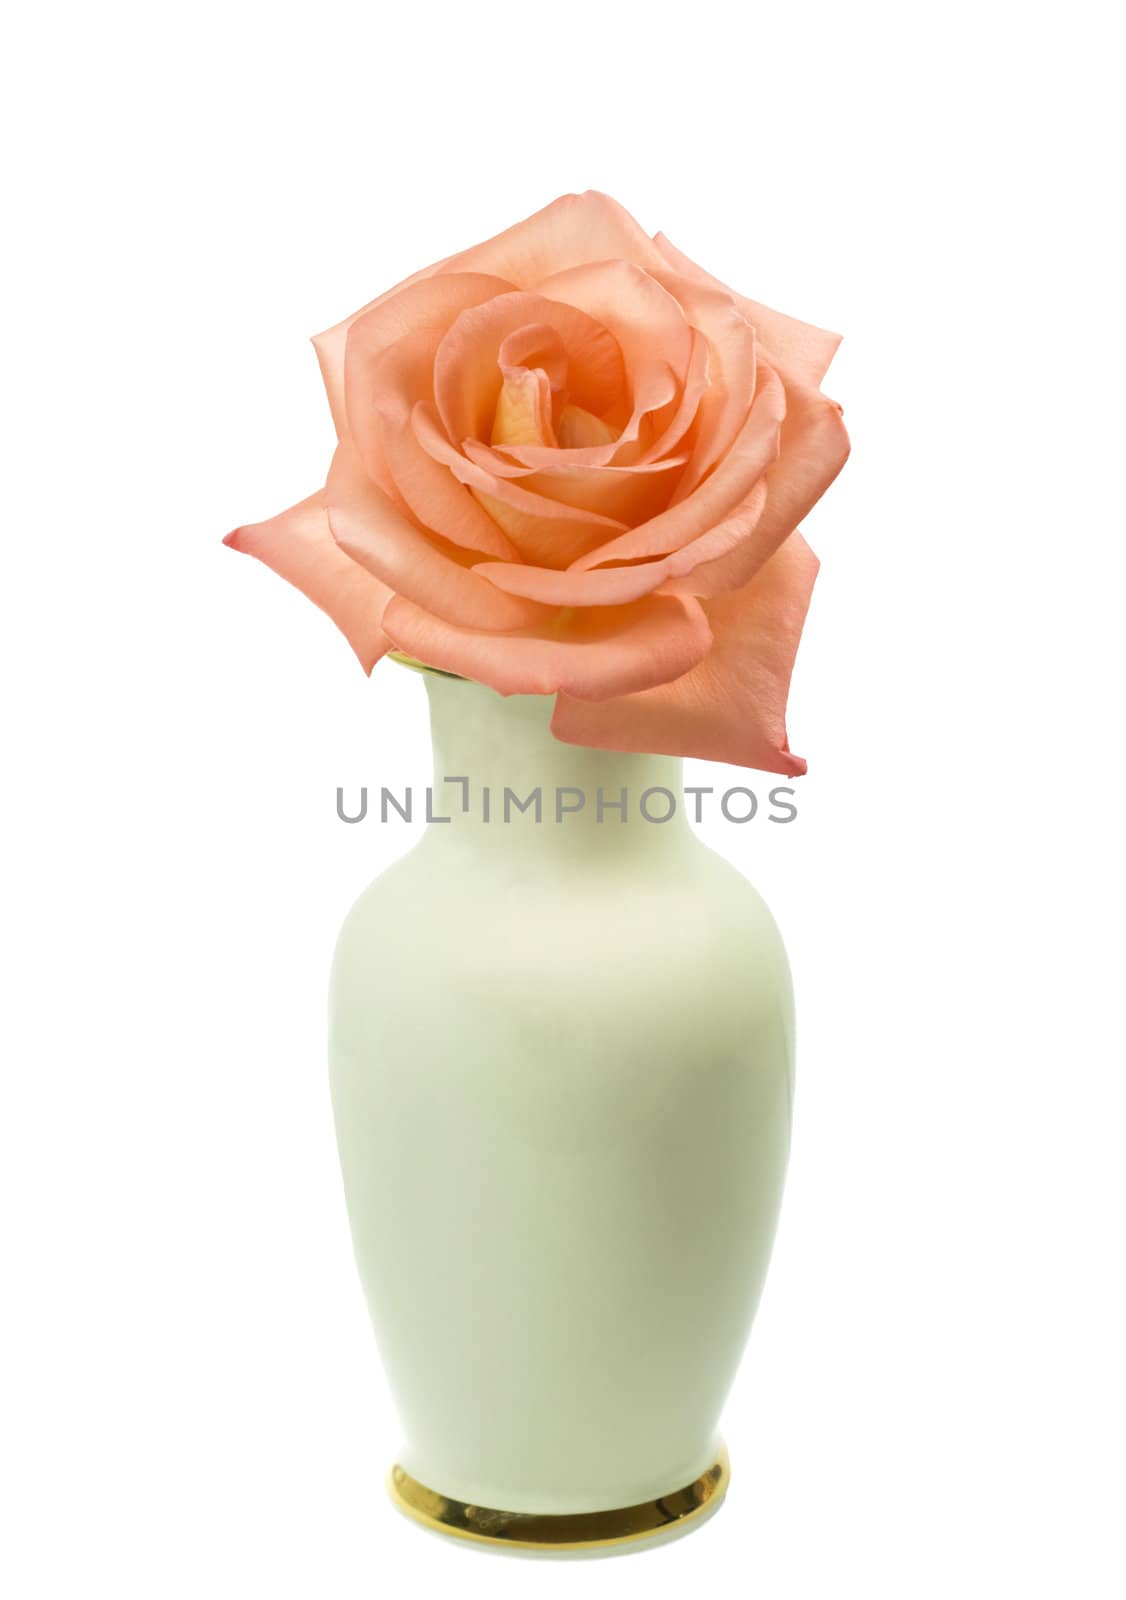 single rose flower in a vase isolated on white background